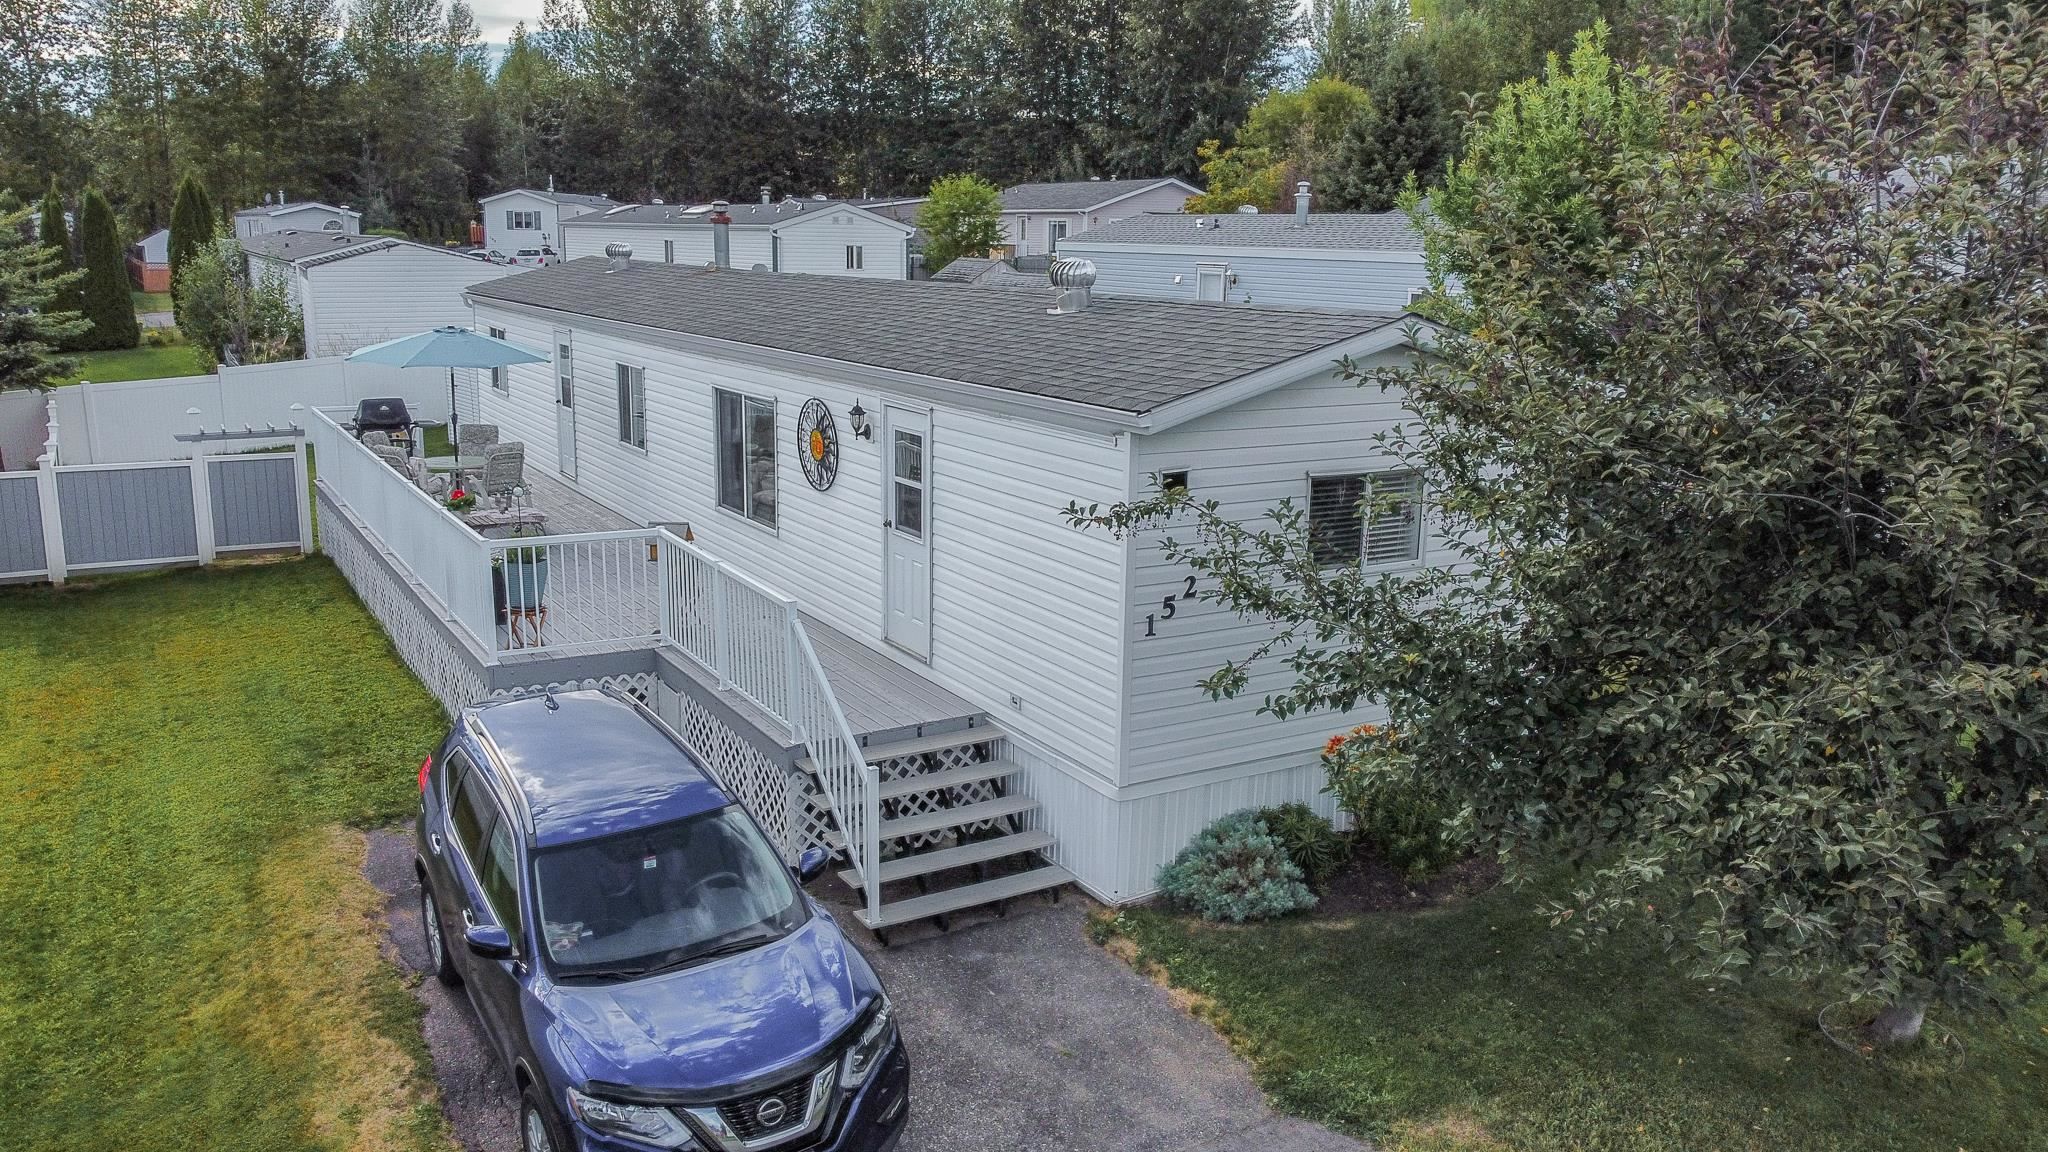 Main Photo: 152 2500 GRANT Road in Prince George: Hart Highway Manufactured Home for sale (PG City North (Zone 73))  : MLS®# R2608988